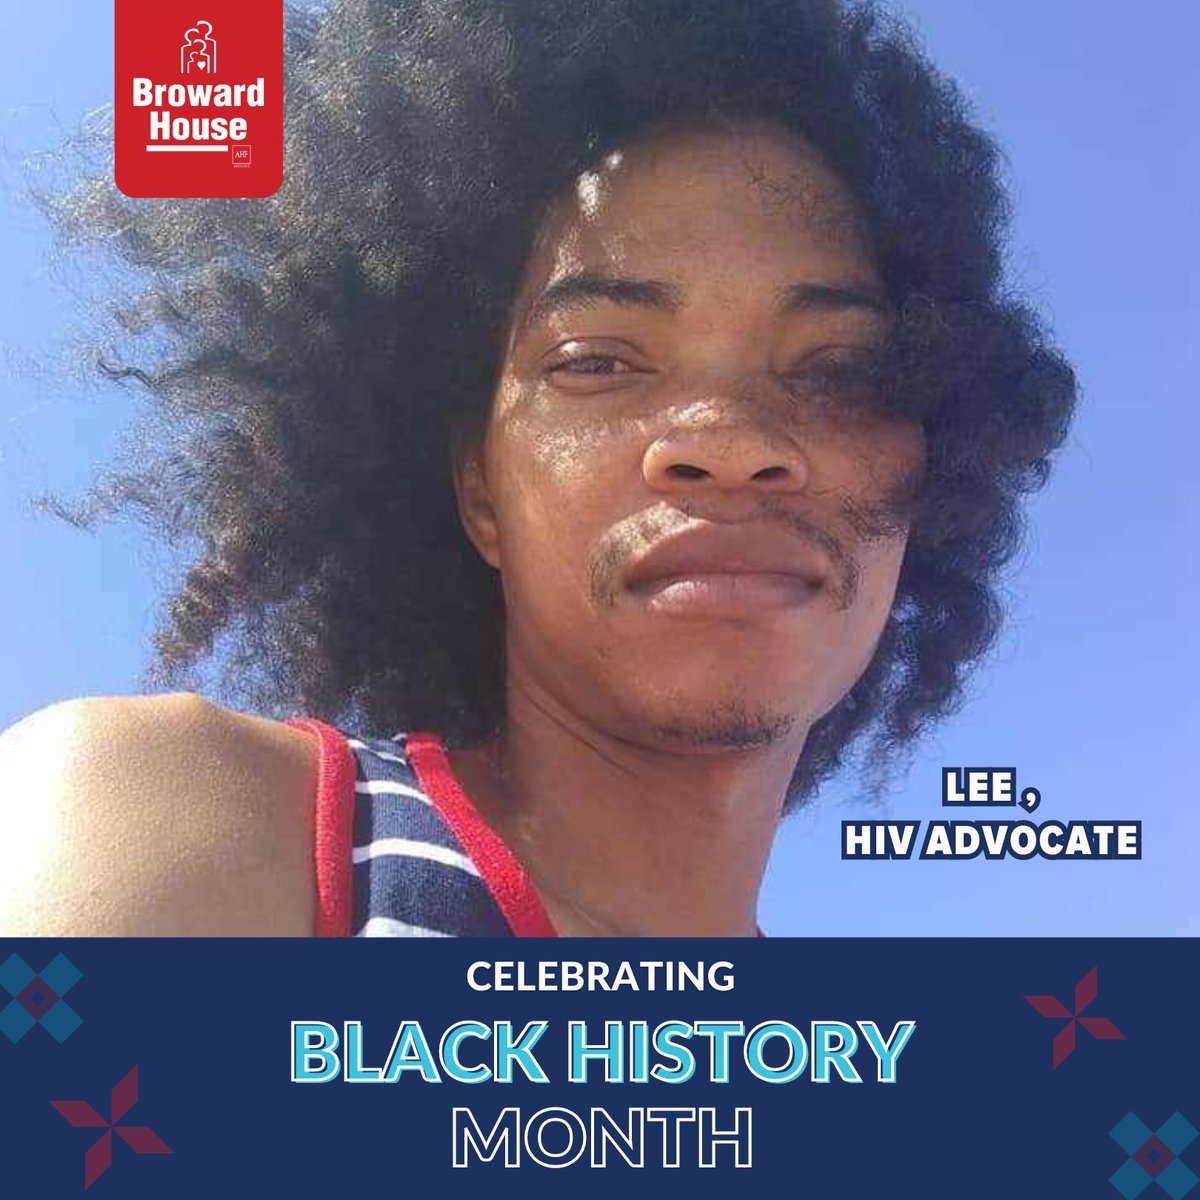 For #BlackHistoryMonth we are sharing the stories of black #HIVadvocates making an impact in our community right now! Lee, HIV advocate, shares his PROMISE story living with #HIV. By sharing his story, he hopes to promote health in the black communities! buff.ly/3ujALOS